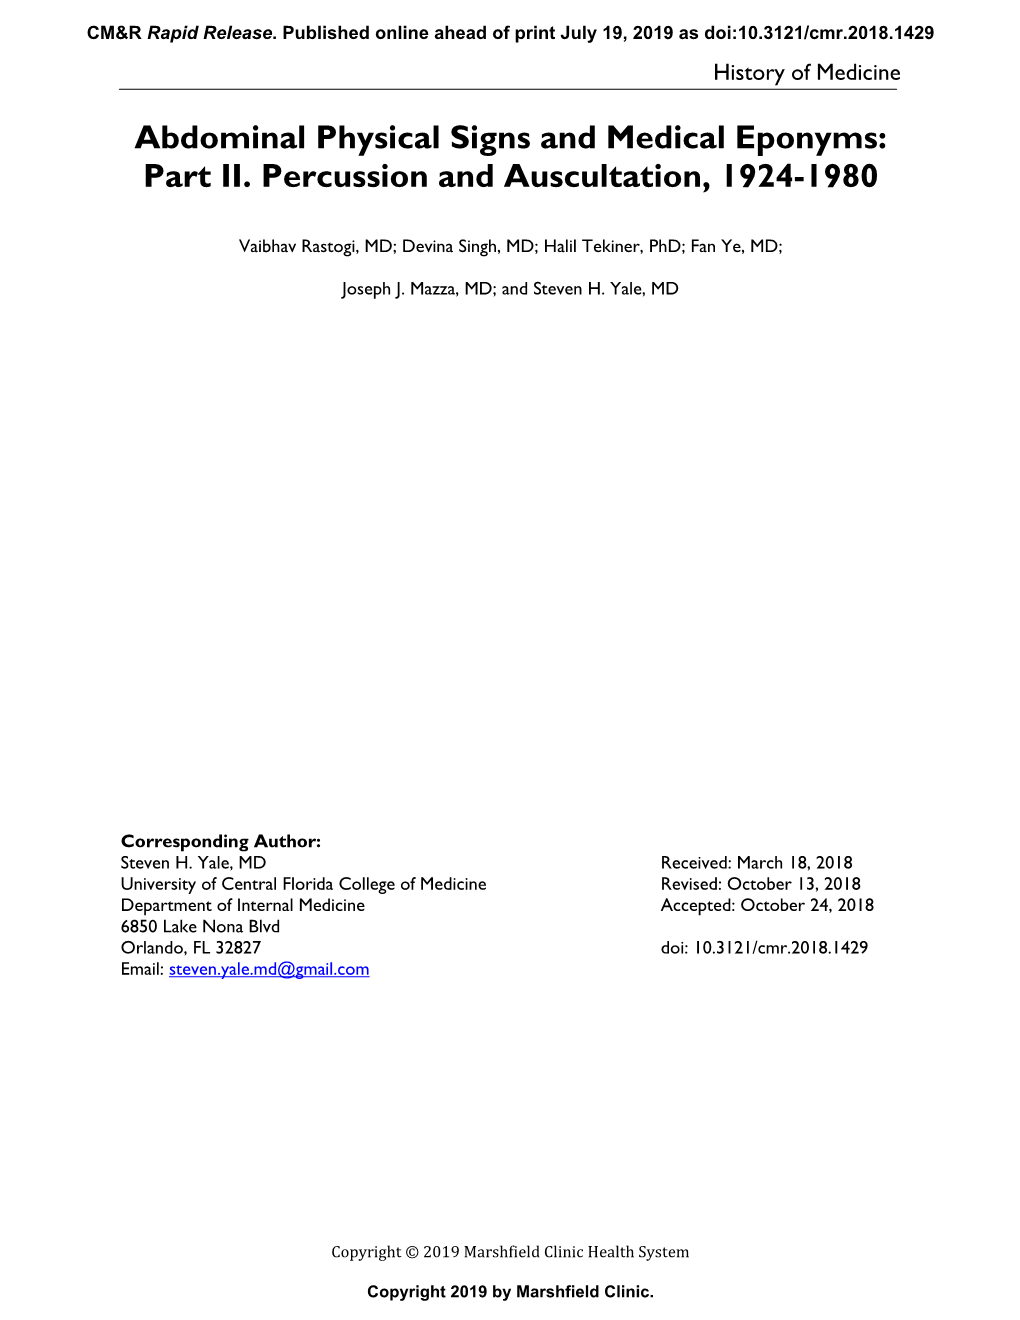 Part II. Percussion and Auscultation, 1924–1980